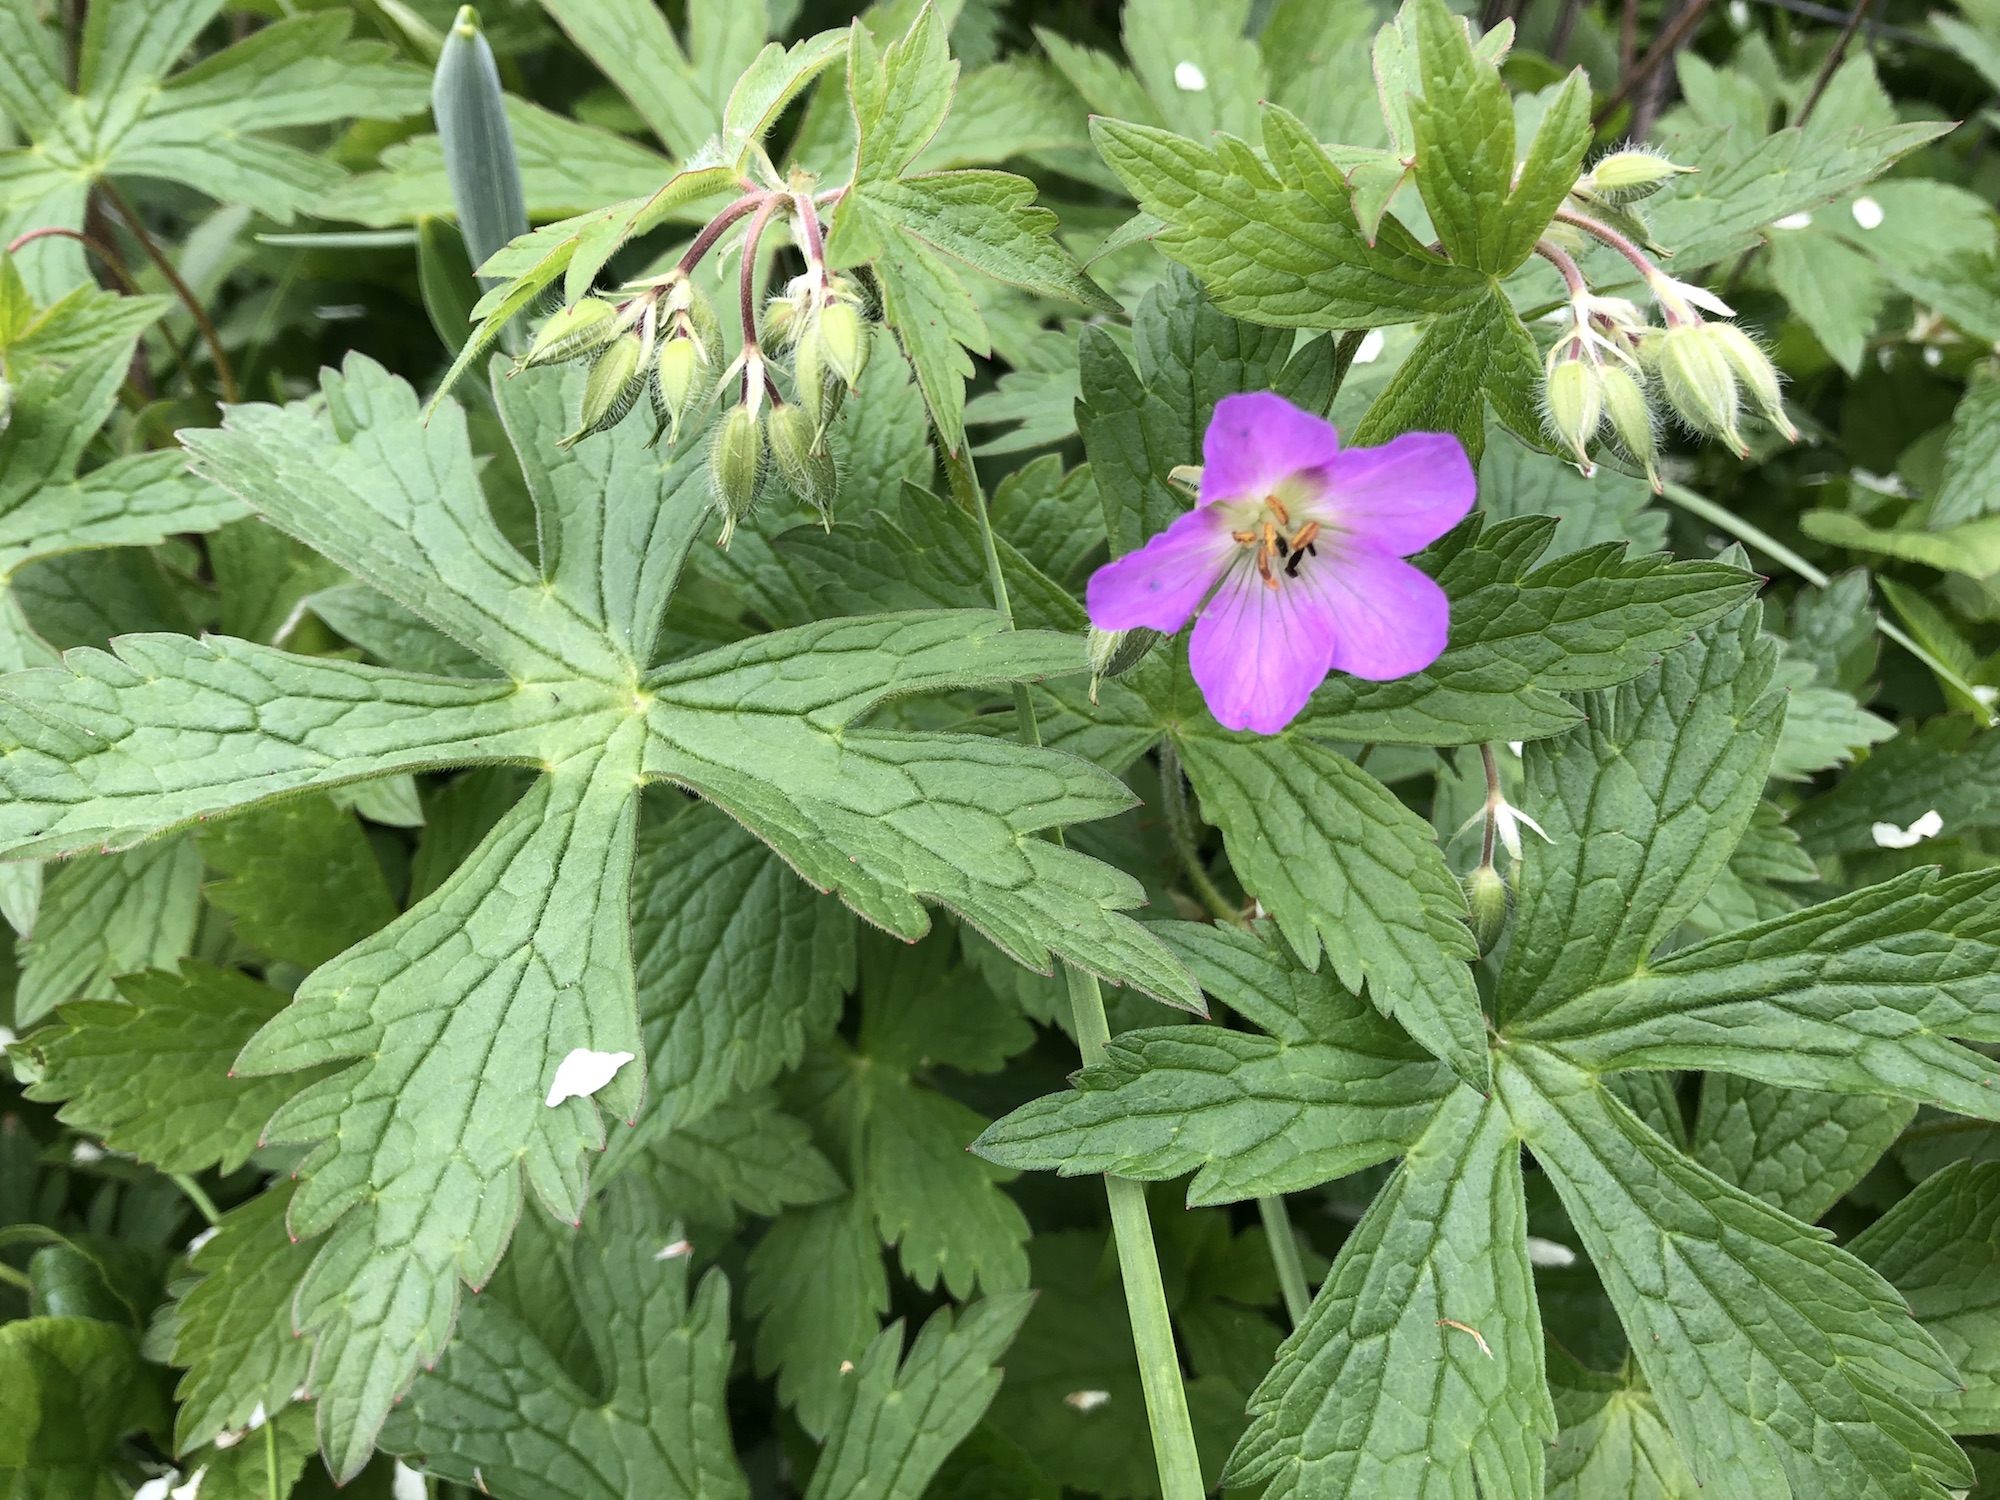 Wild Geranium along the Ho-Nee-Um boardwalk near the Council Ring  on May 7, 2019 in Madison, Wisconsin.